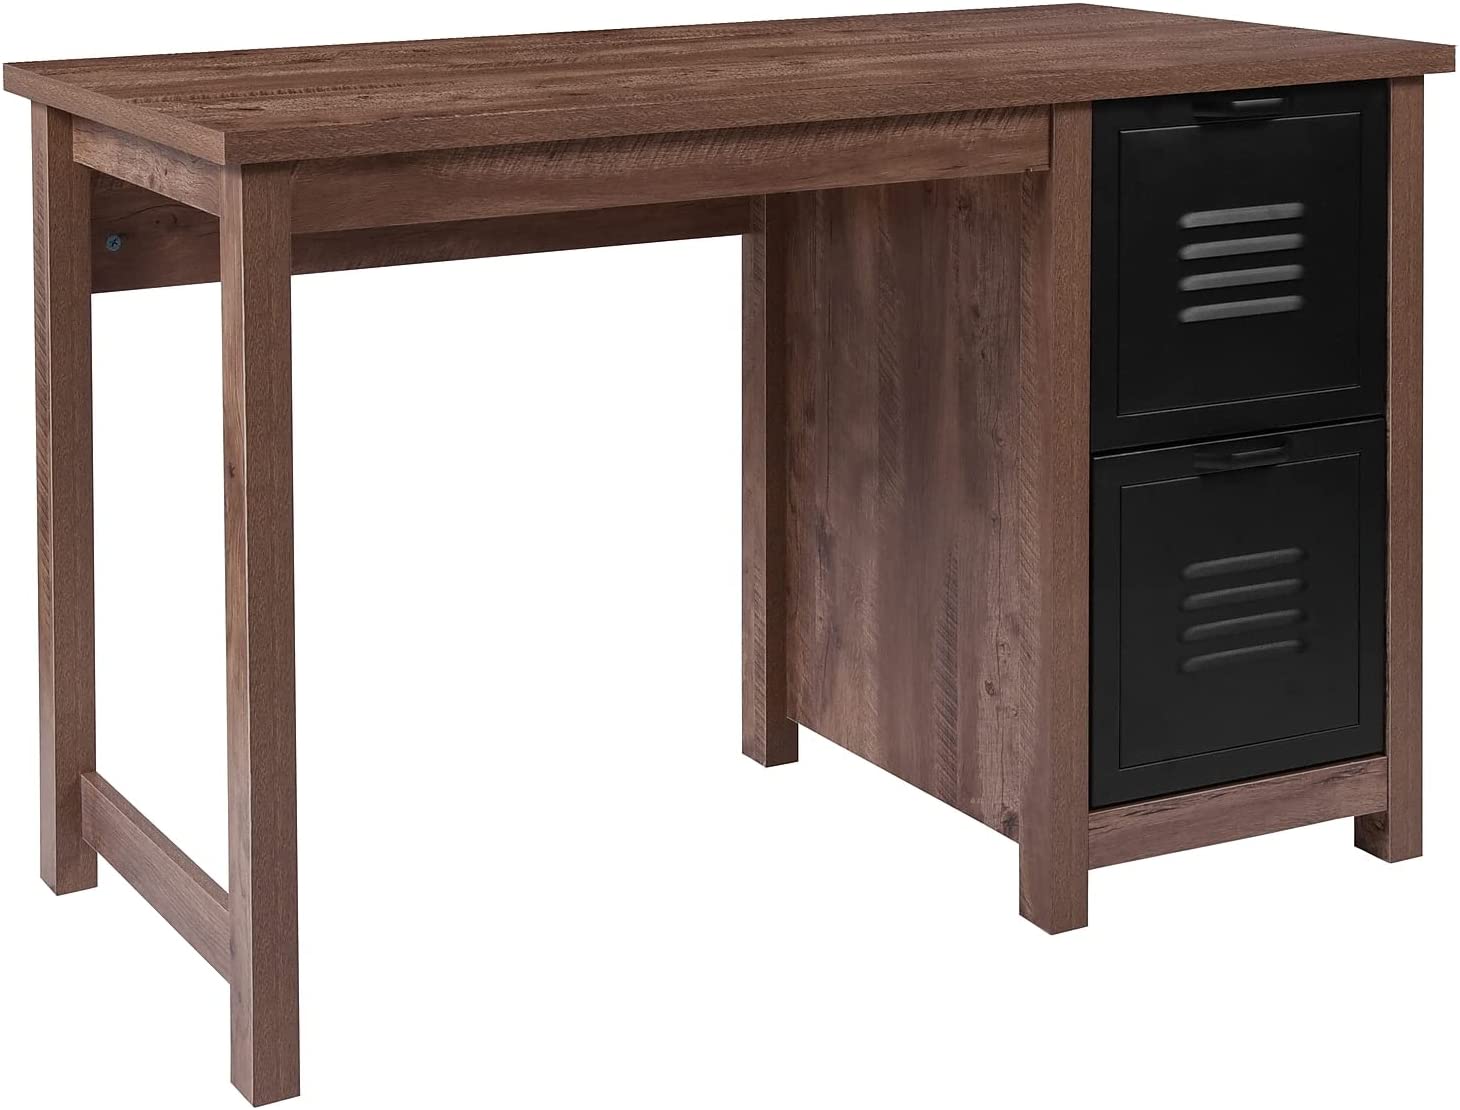 Flash Furniture New Lancaster Collection Crosscut Oak Wood Grain Finish Computer Desk with Metal Drawers